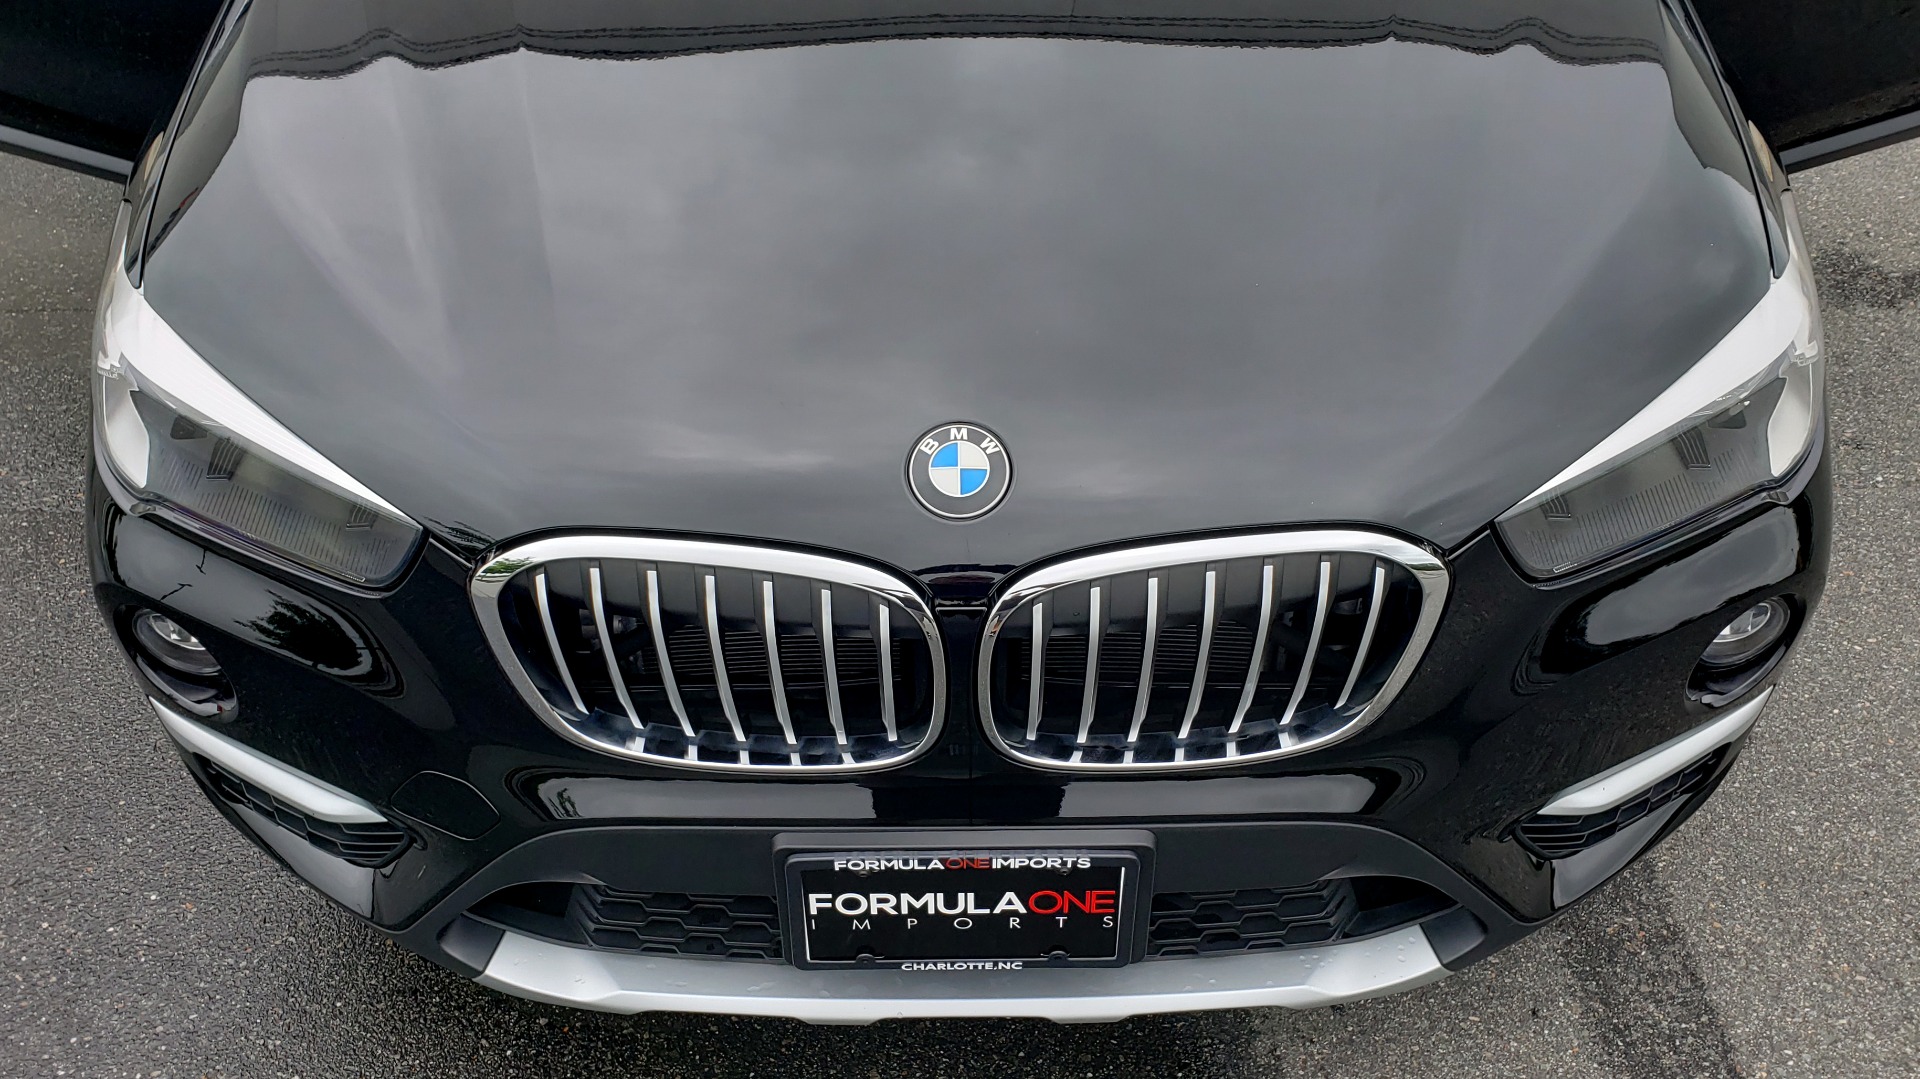 Used 2018 BMW X1 XDRIVE28I / CONV PKG / NAV / HTD STS / PANO-ROOF / 18IN WHLS / REARVIEW for sale Sold at Formula Imports in Charlotte NC 28227 26